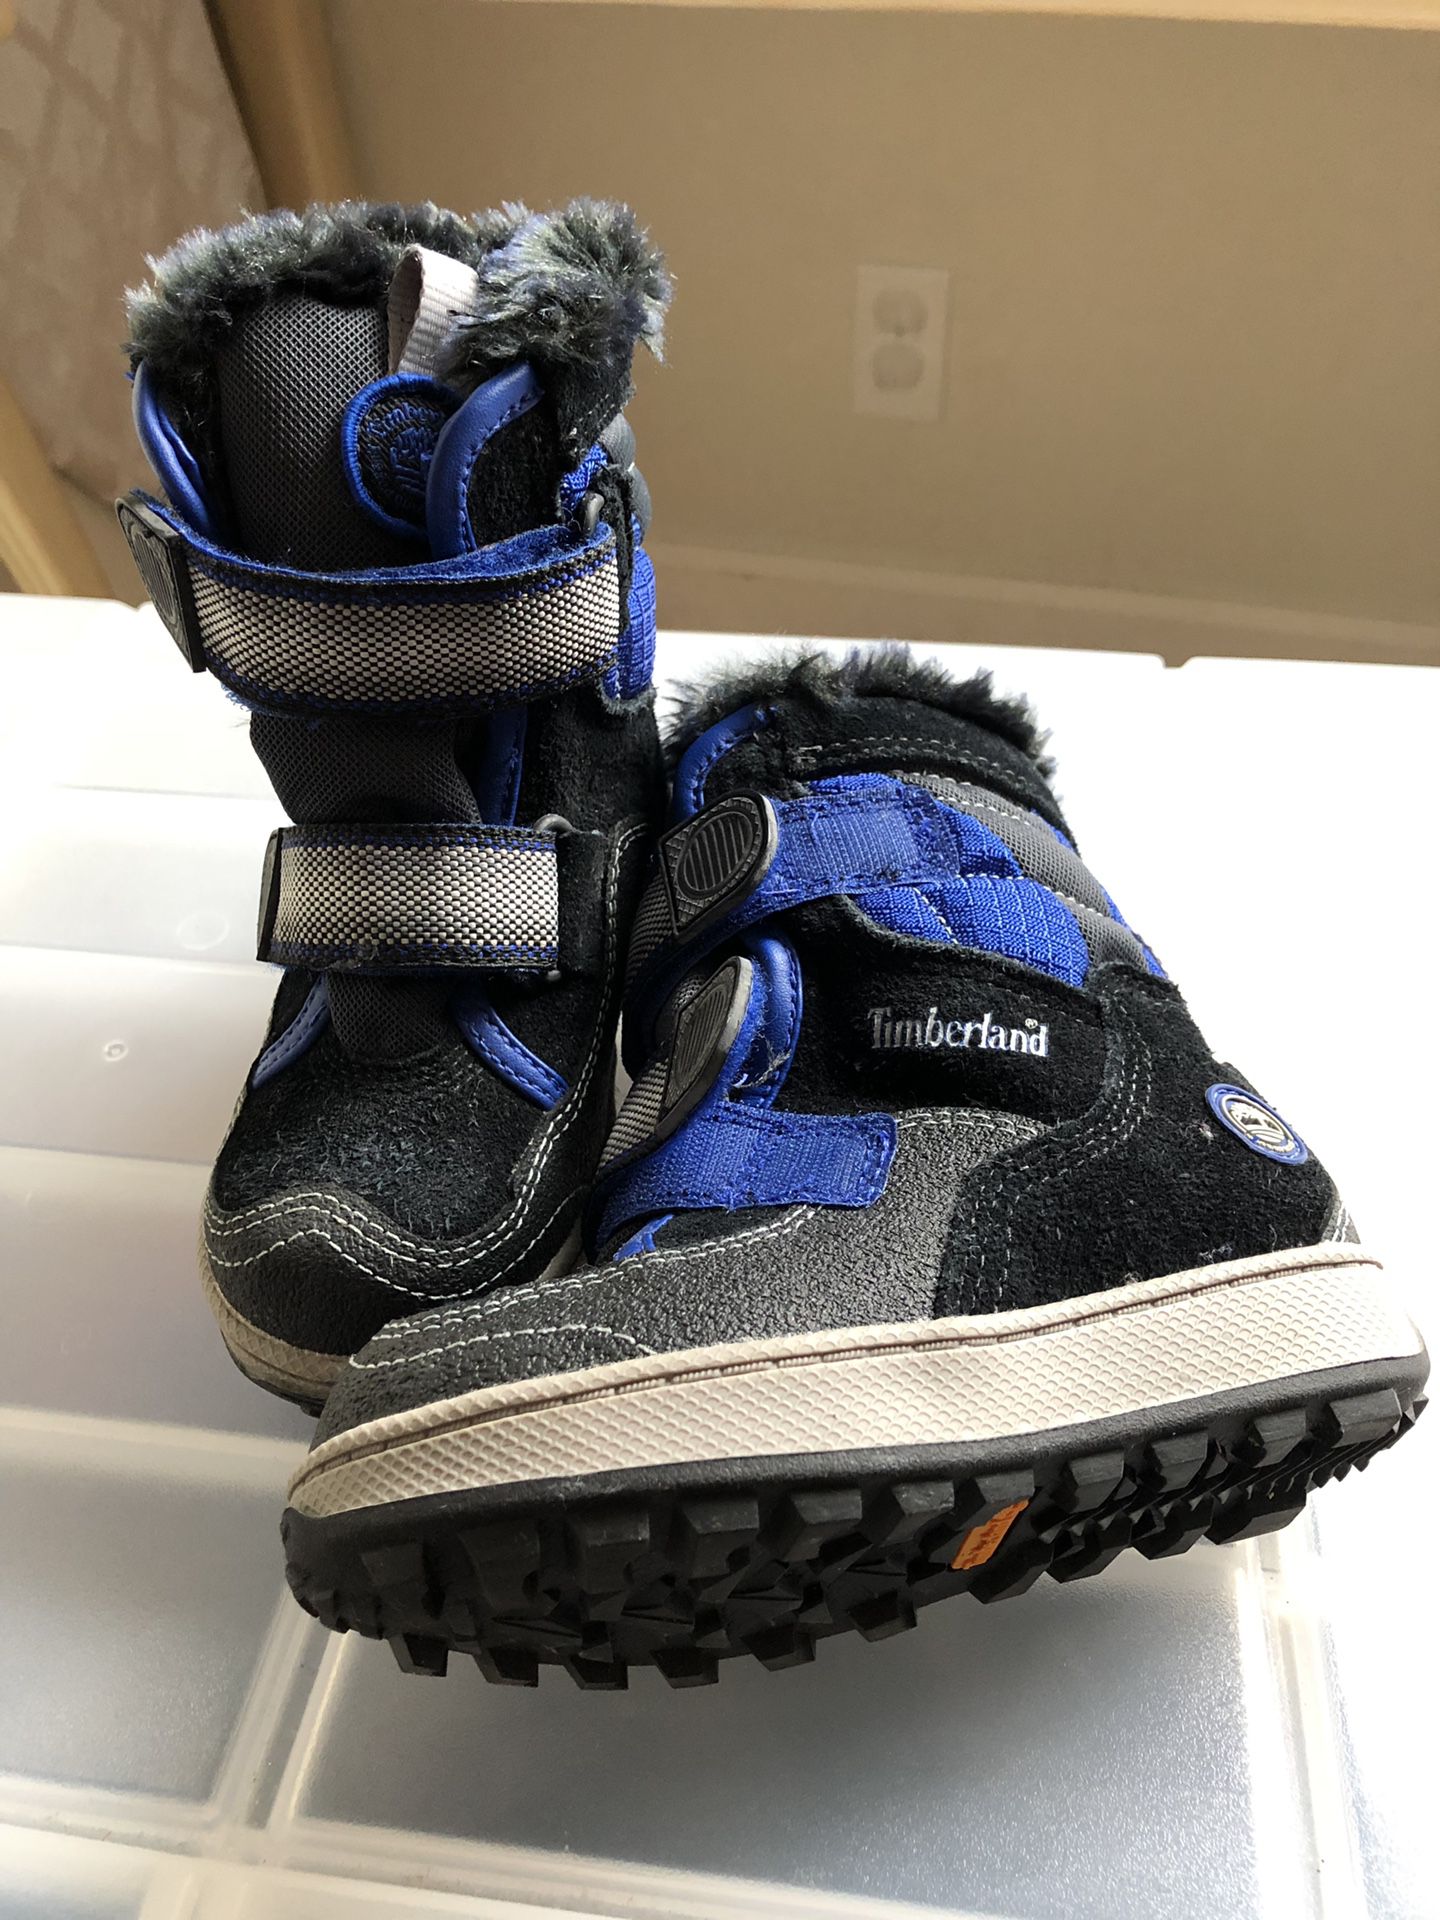 Timberland toddler winter/snow boots size 8. Never used